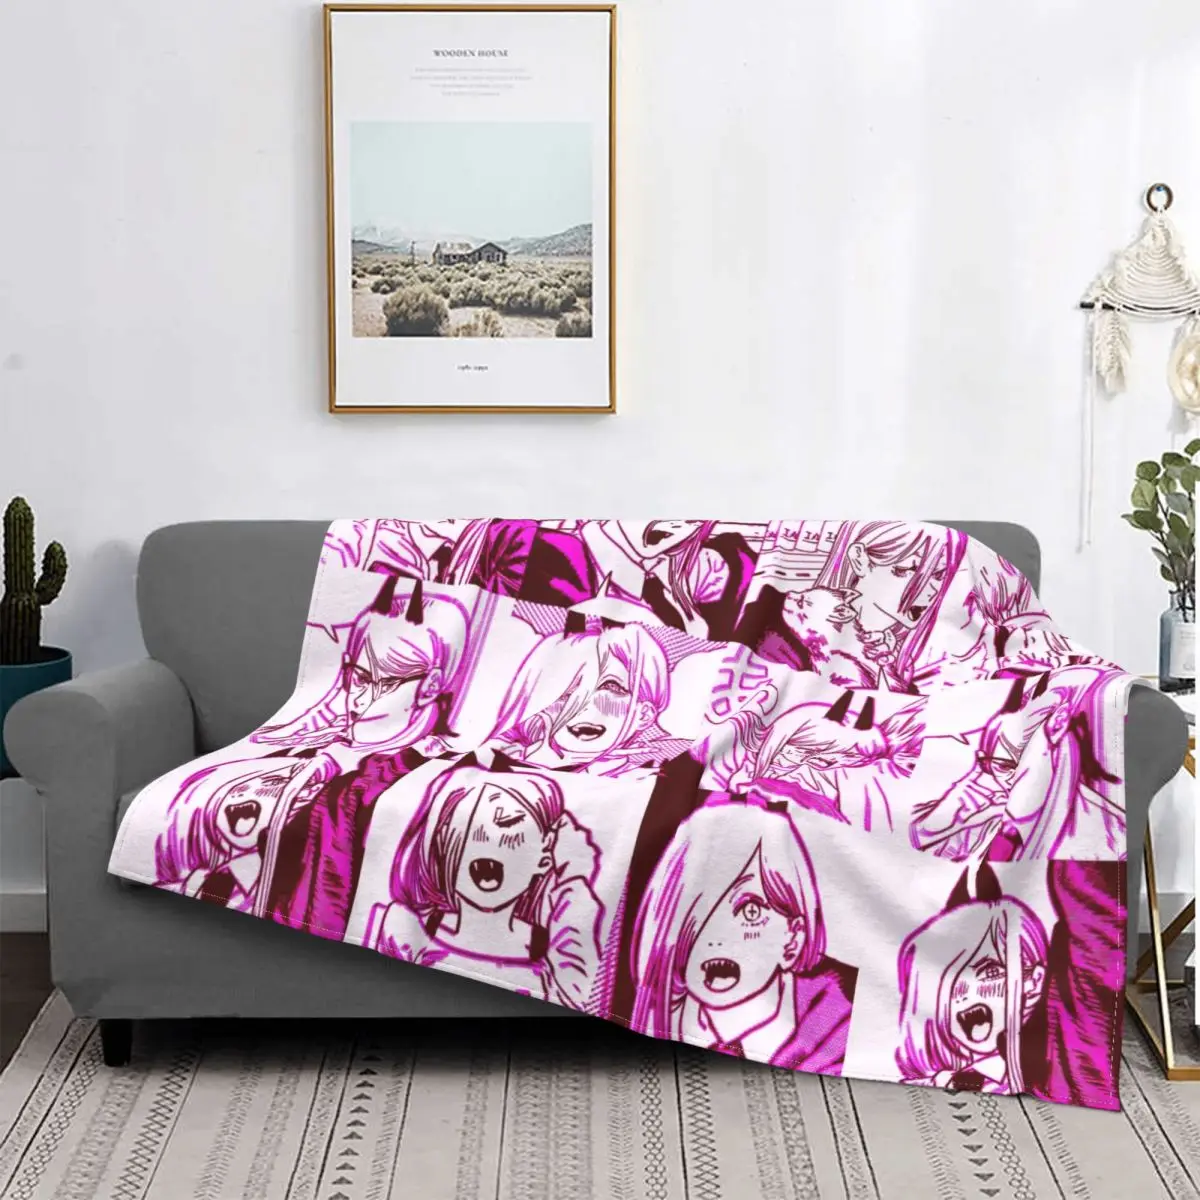 

Chainsaw Man Anime Collage Blanket Soft Flannel Fleece Warm Kawaii Power Throw Blankets for Office Bedding Couch Bedspreads